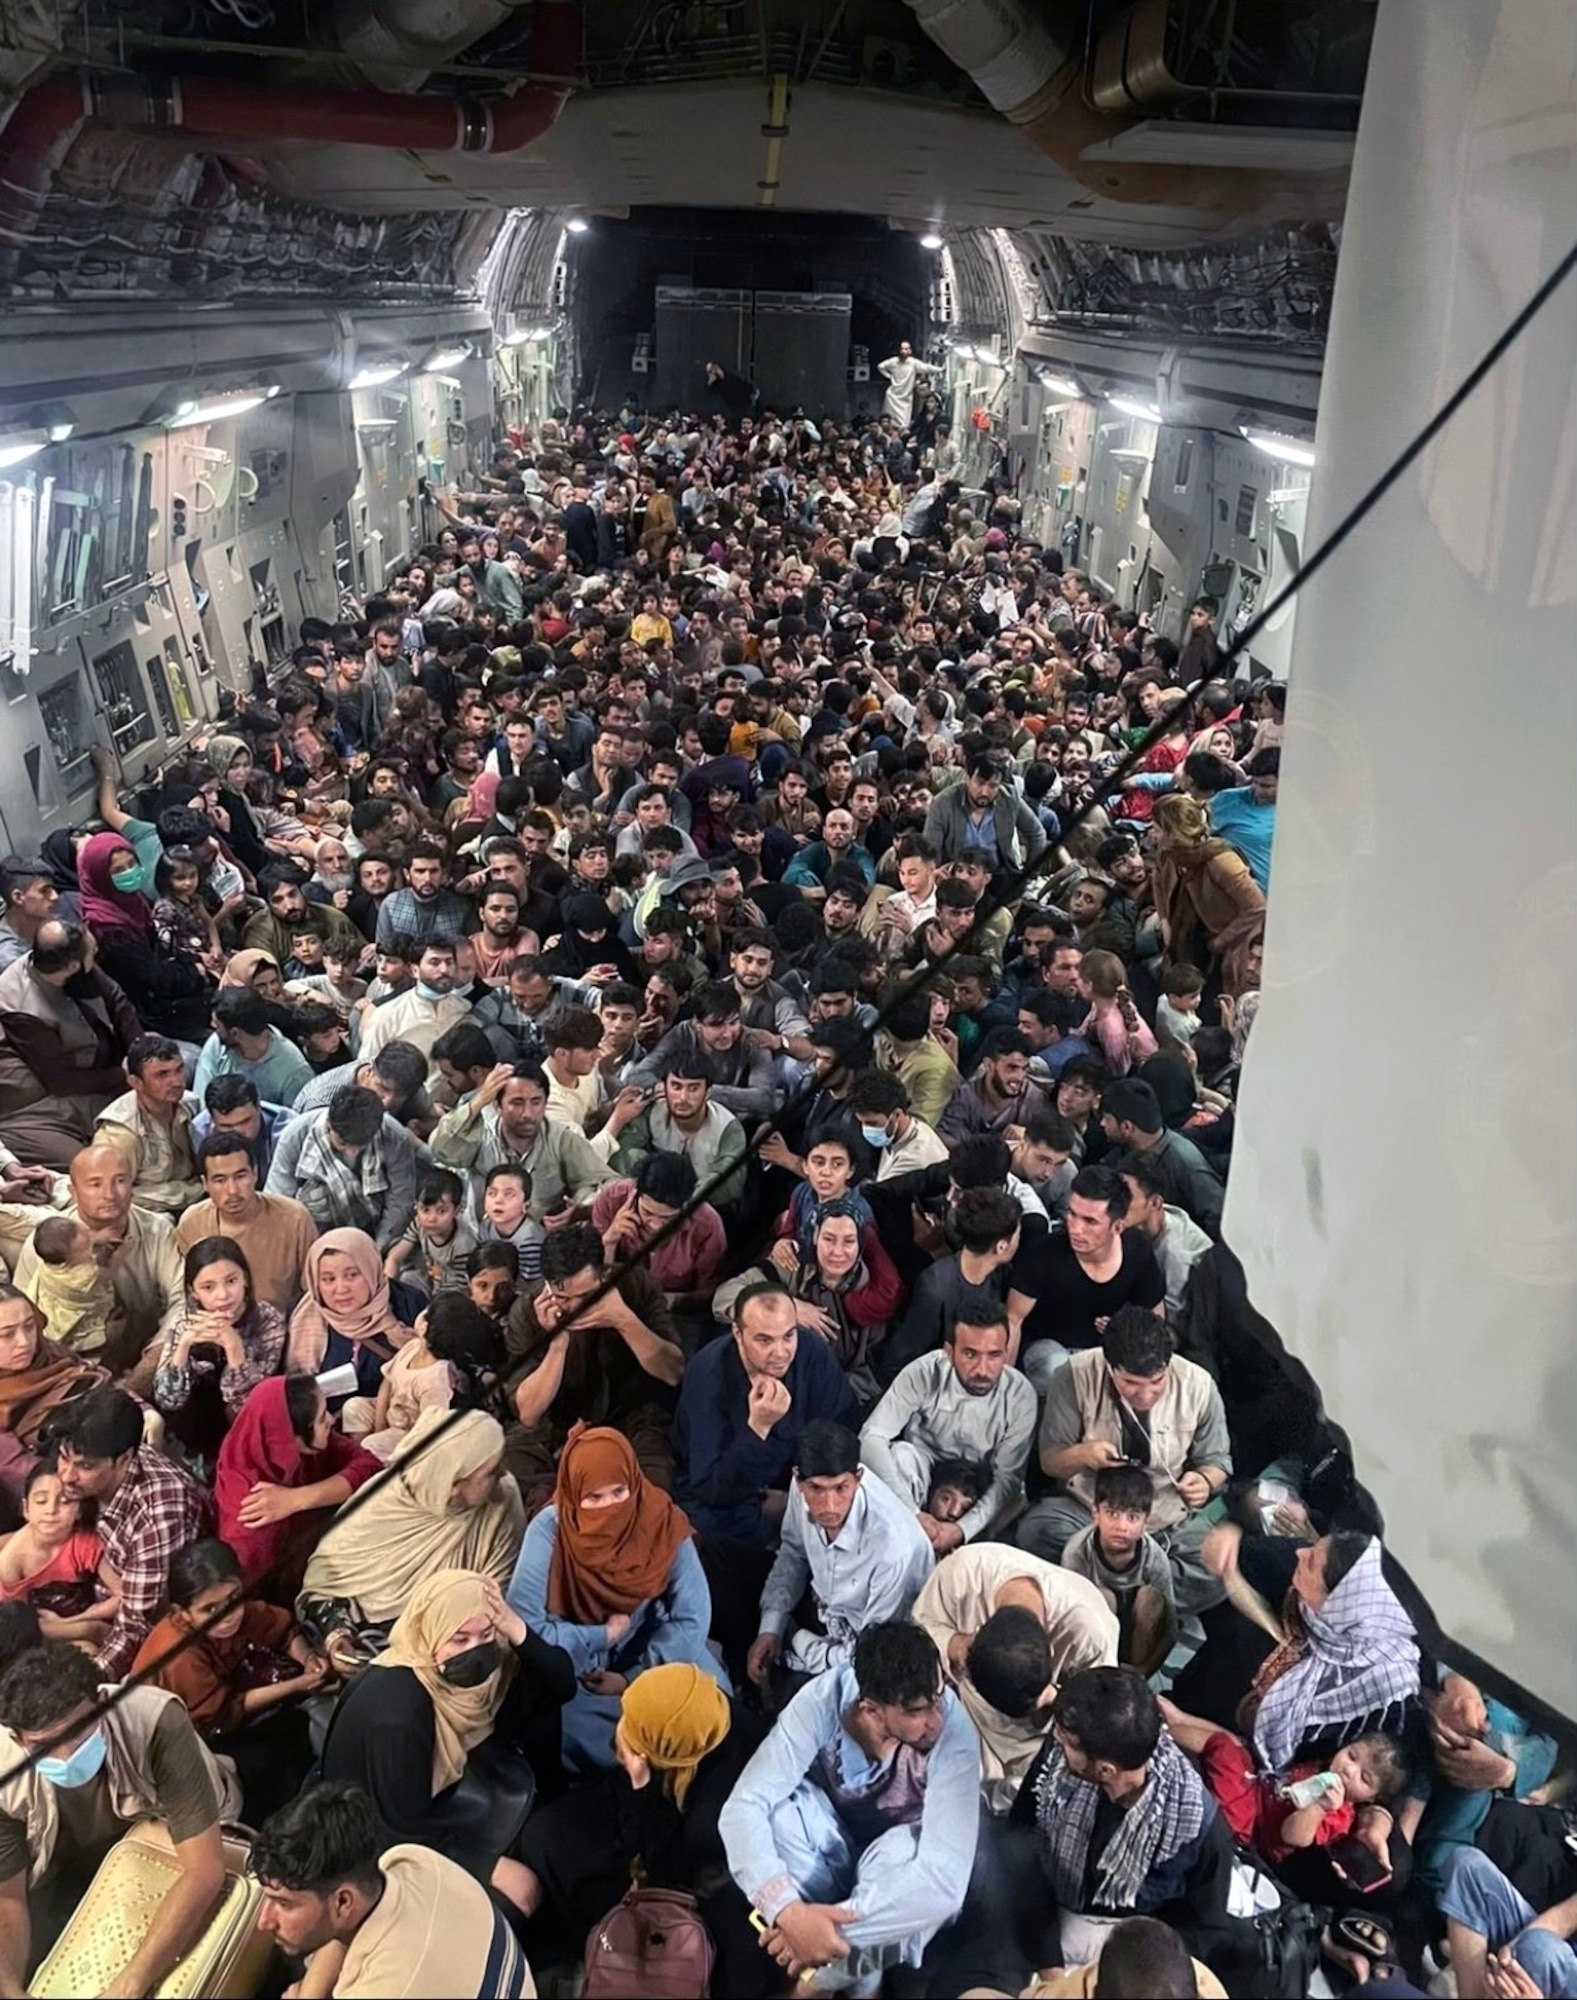 C-17 carrying passengers out of Afghanistan